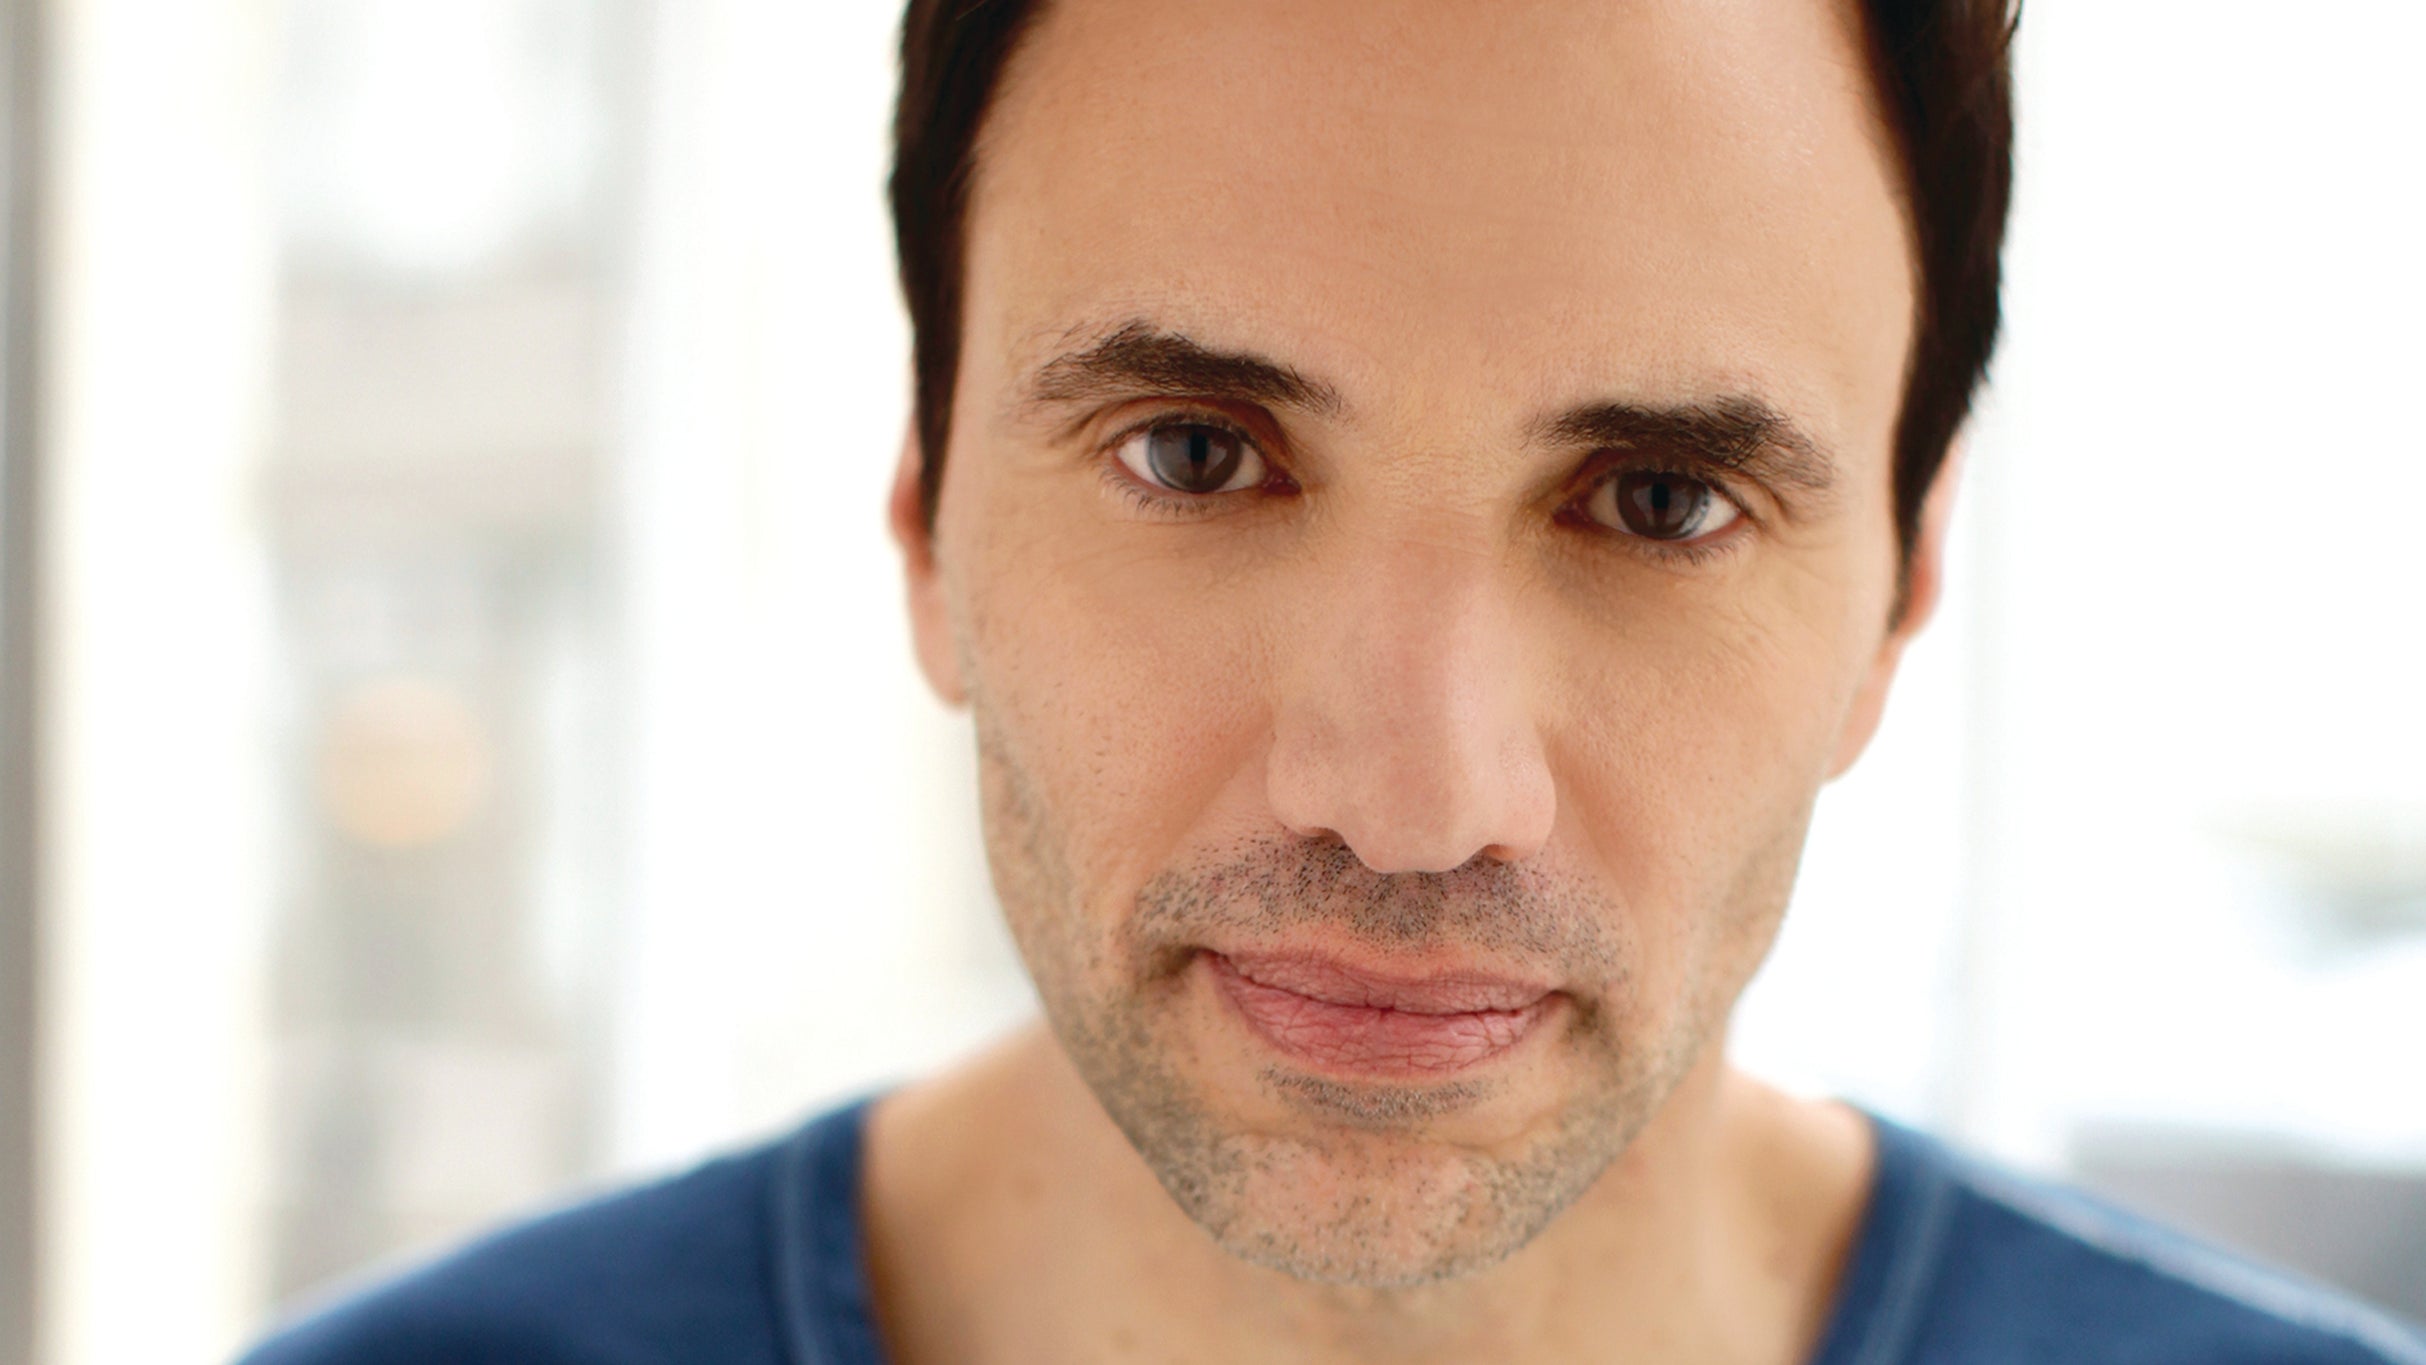 Paul Mecurio's Permission to Speak in Milwaukee promo photo for Exclusive presale offer code